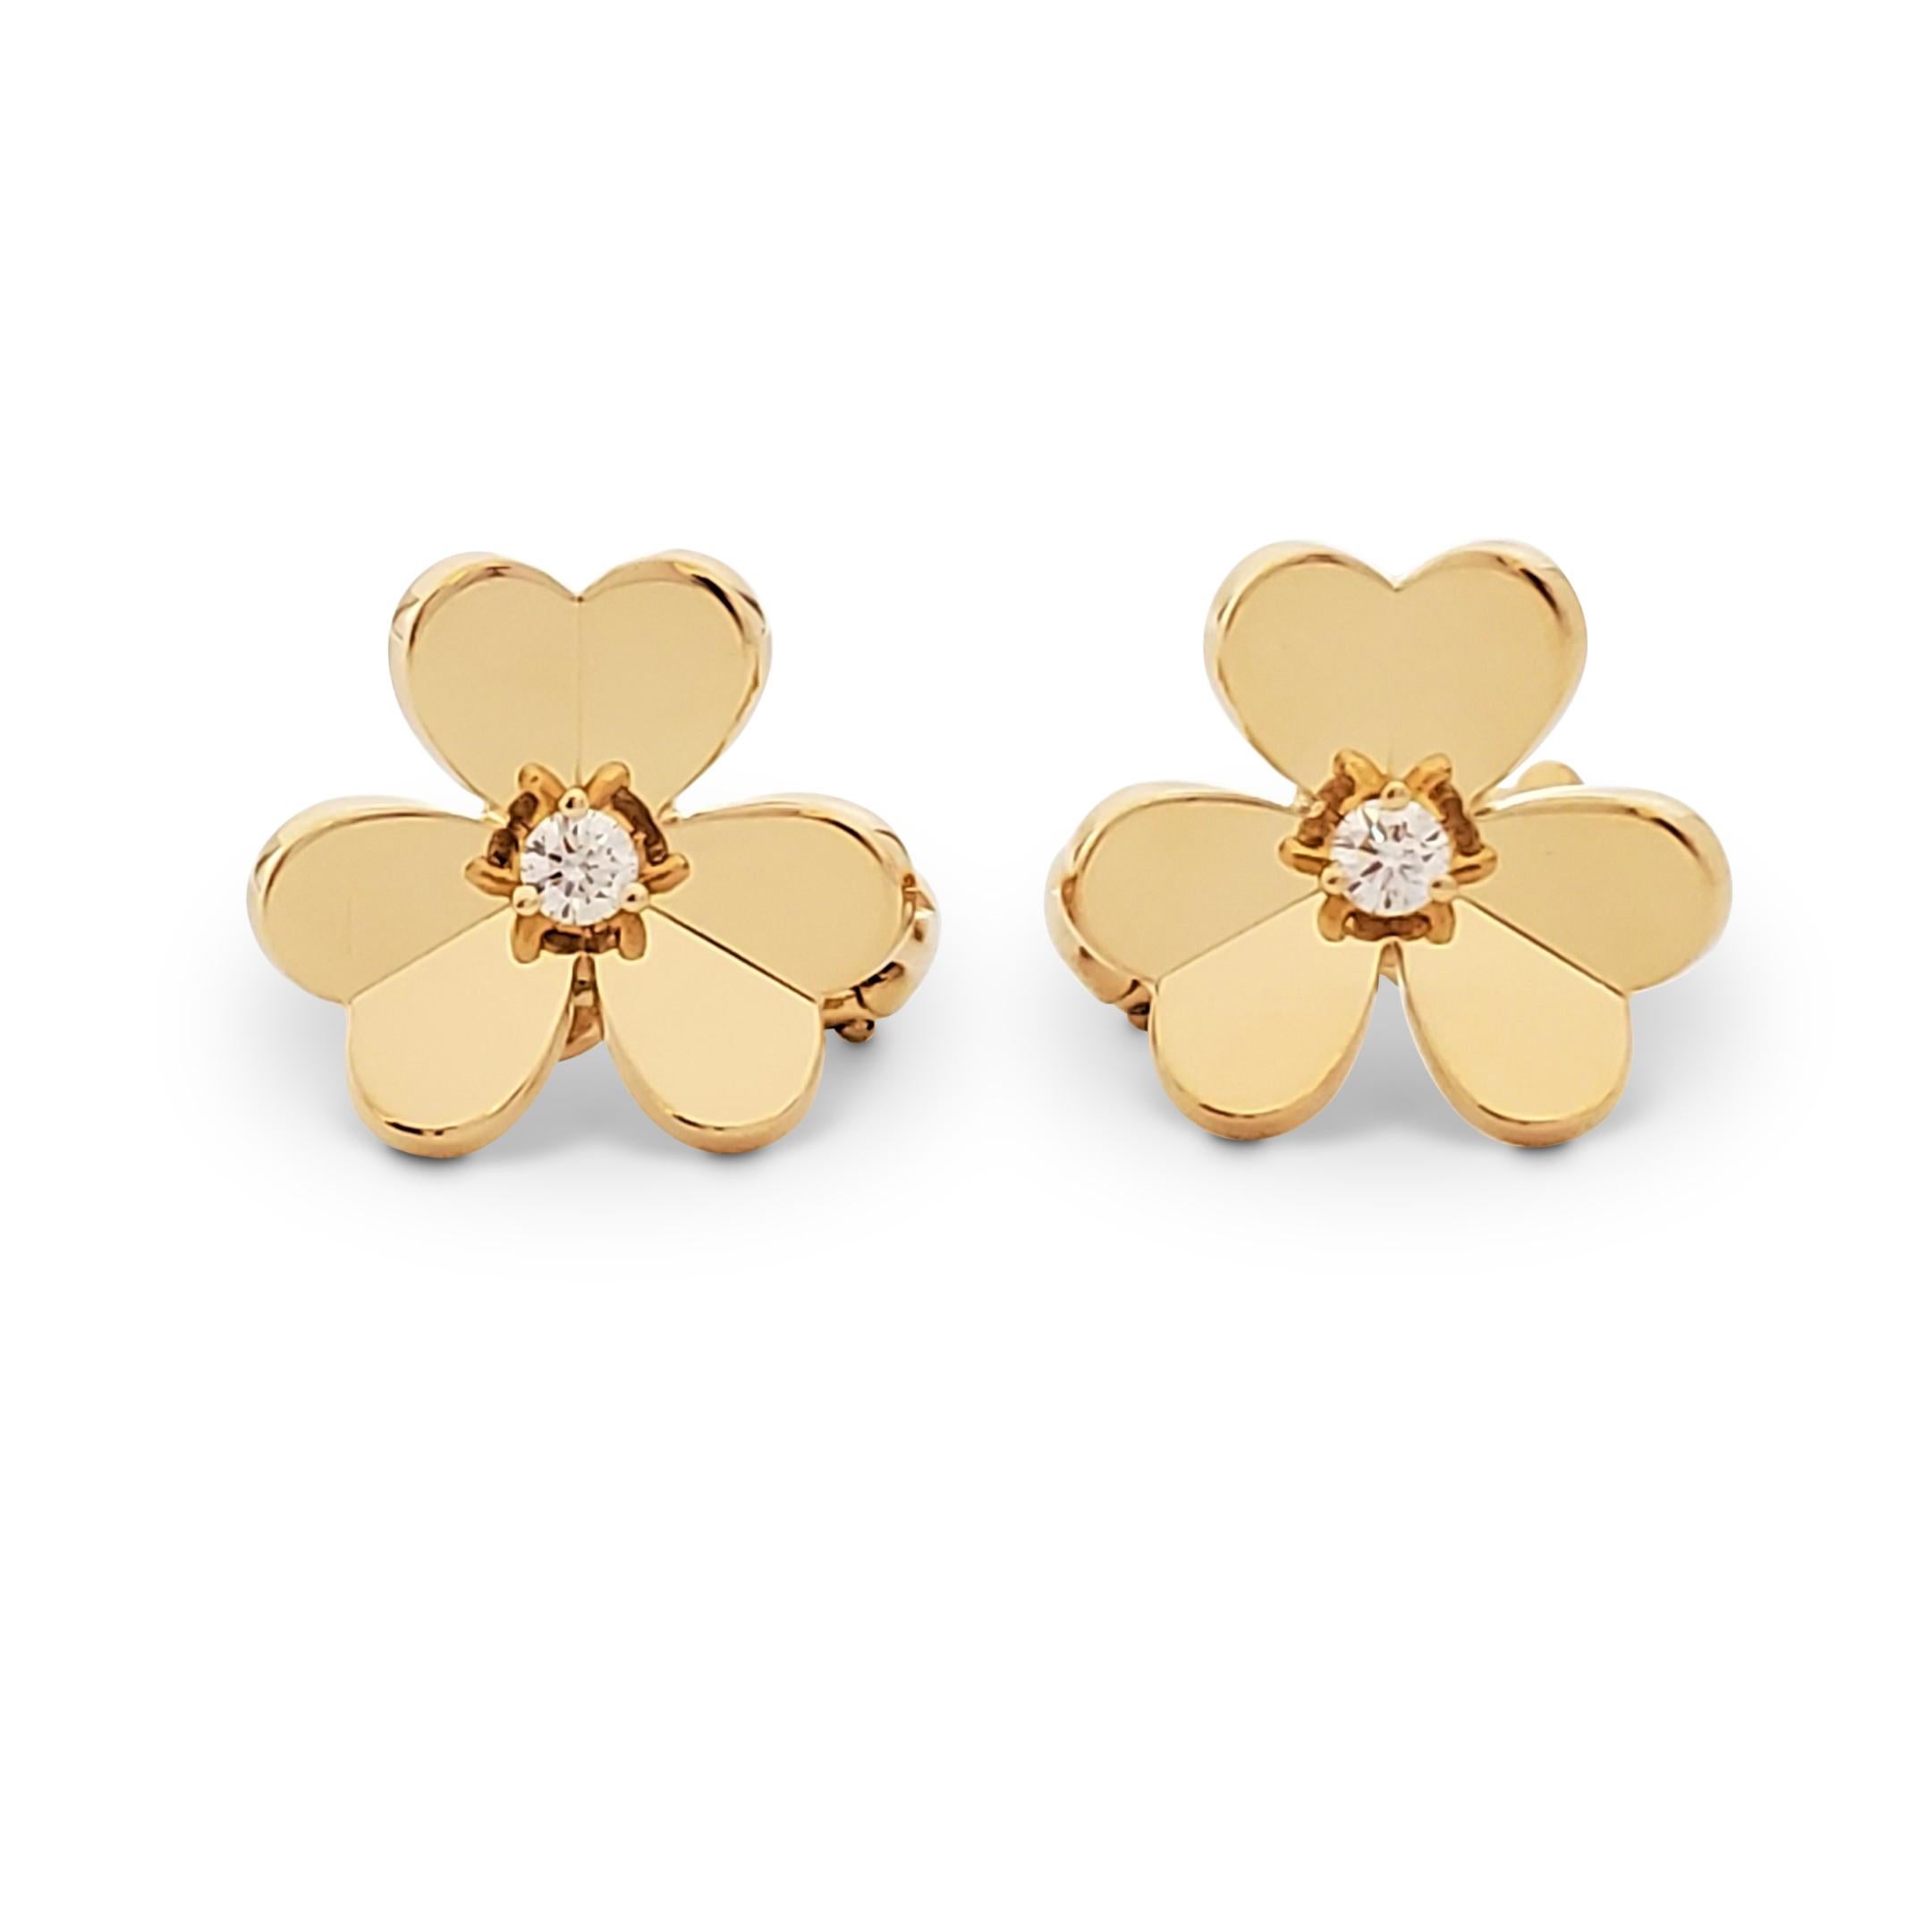 Authentic Van Cleef & Arpels 'Frivole' earrings feature mirror-polished 18 karat yellow gold heart-shaped petals set with a round brilliant cut diamond at the center (0.17 carats total, E-F color, VS clarity). Signed VCA, Au750, with serial number